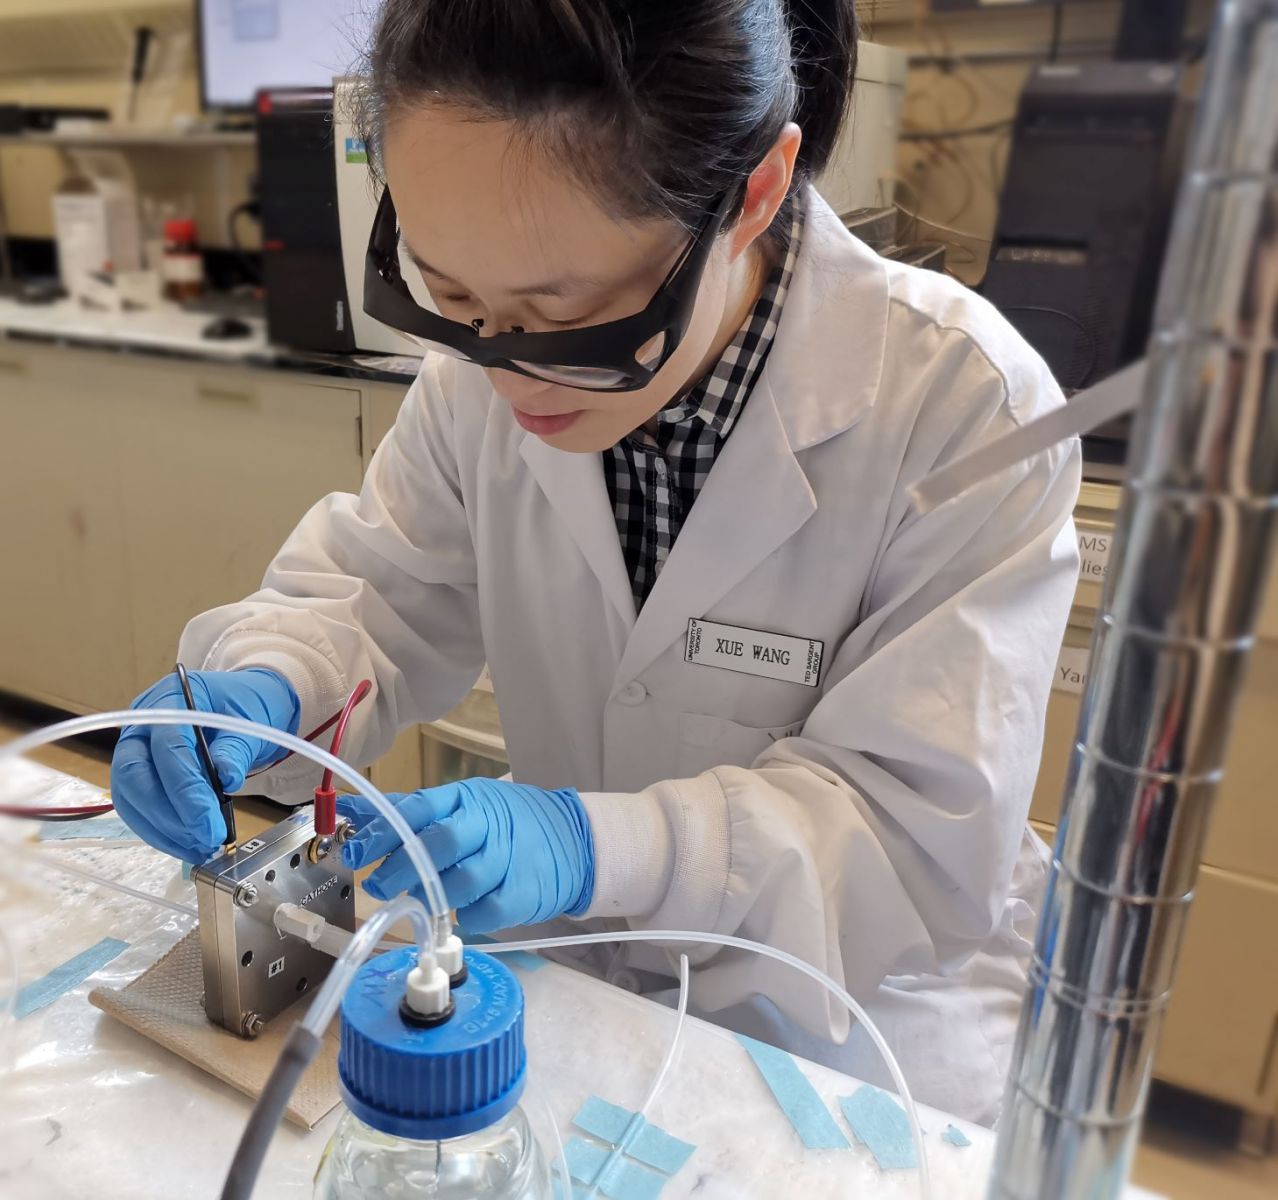 Xue Wang installing a membrane electrode assembly MEA cell for testing the performance of the N-CCu catalyst in CO2RR.